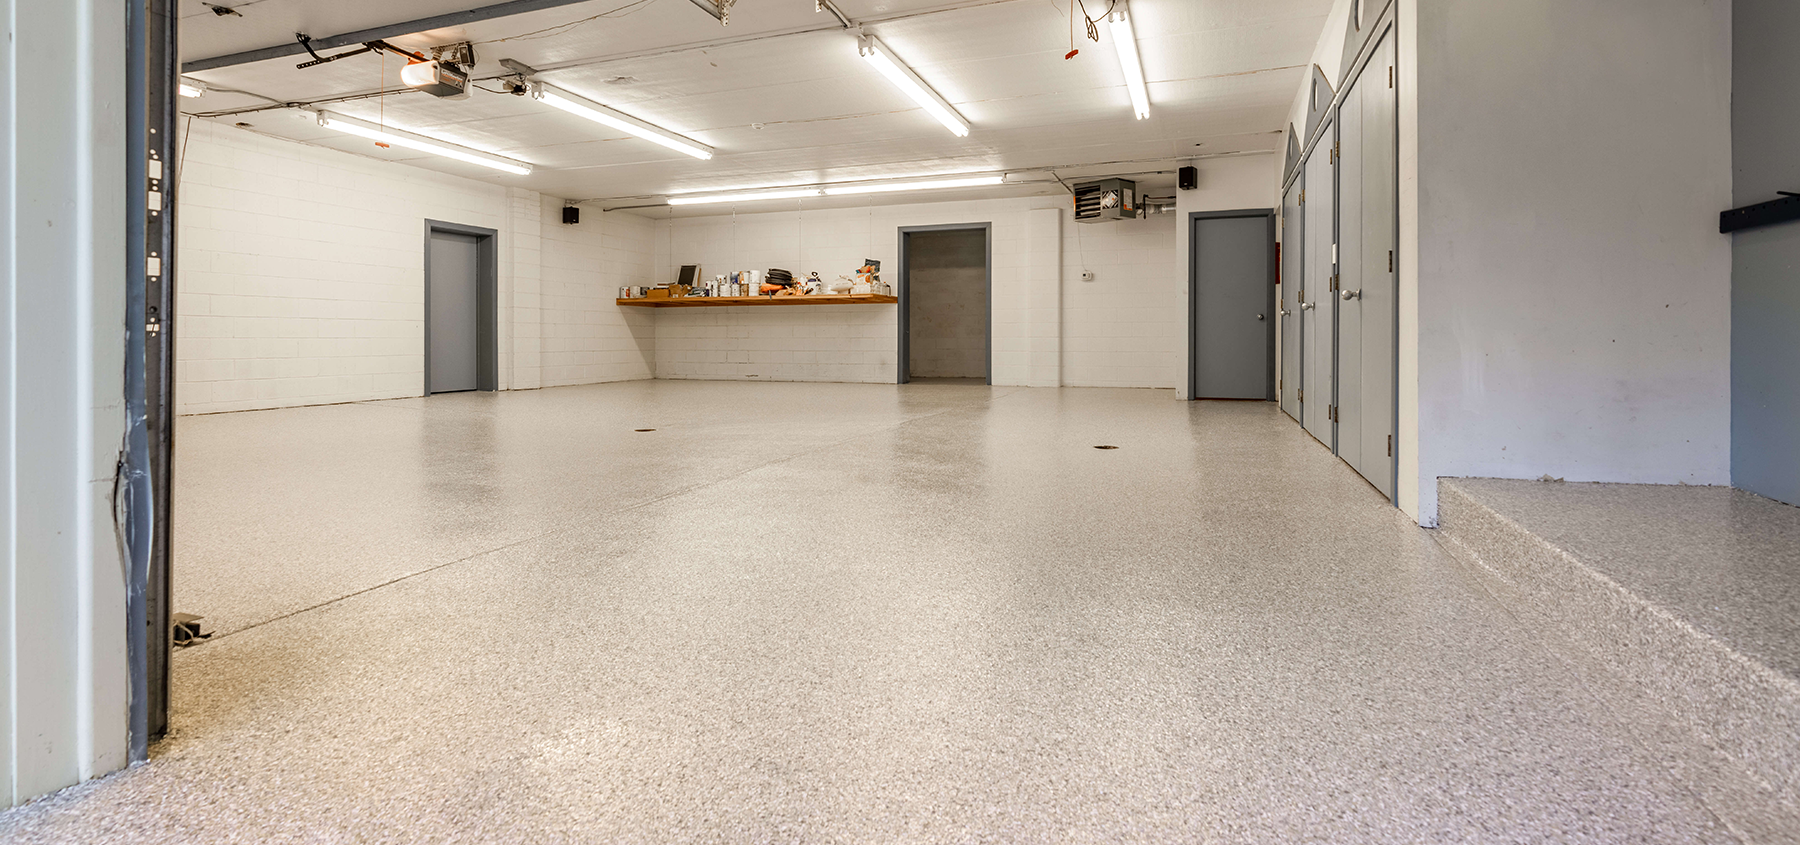 A large empty room with a white floor and white walls.